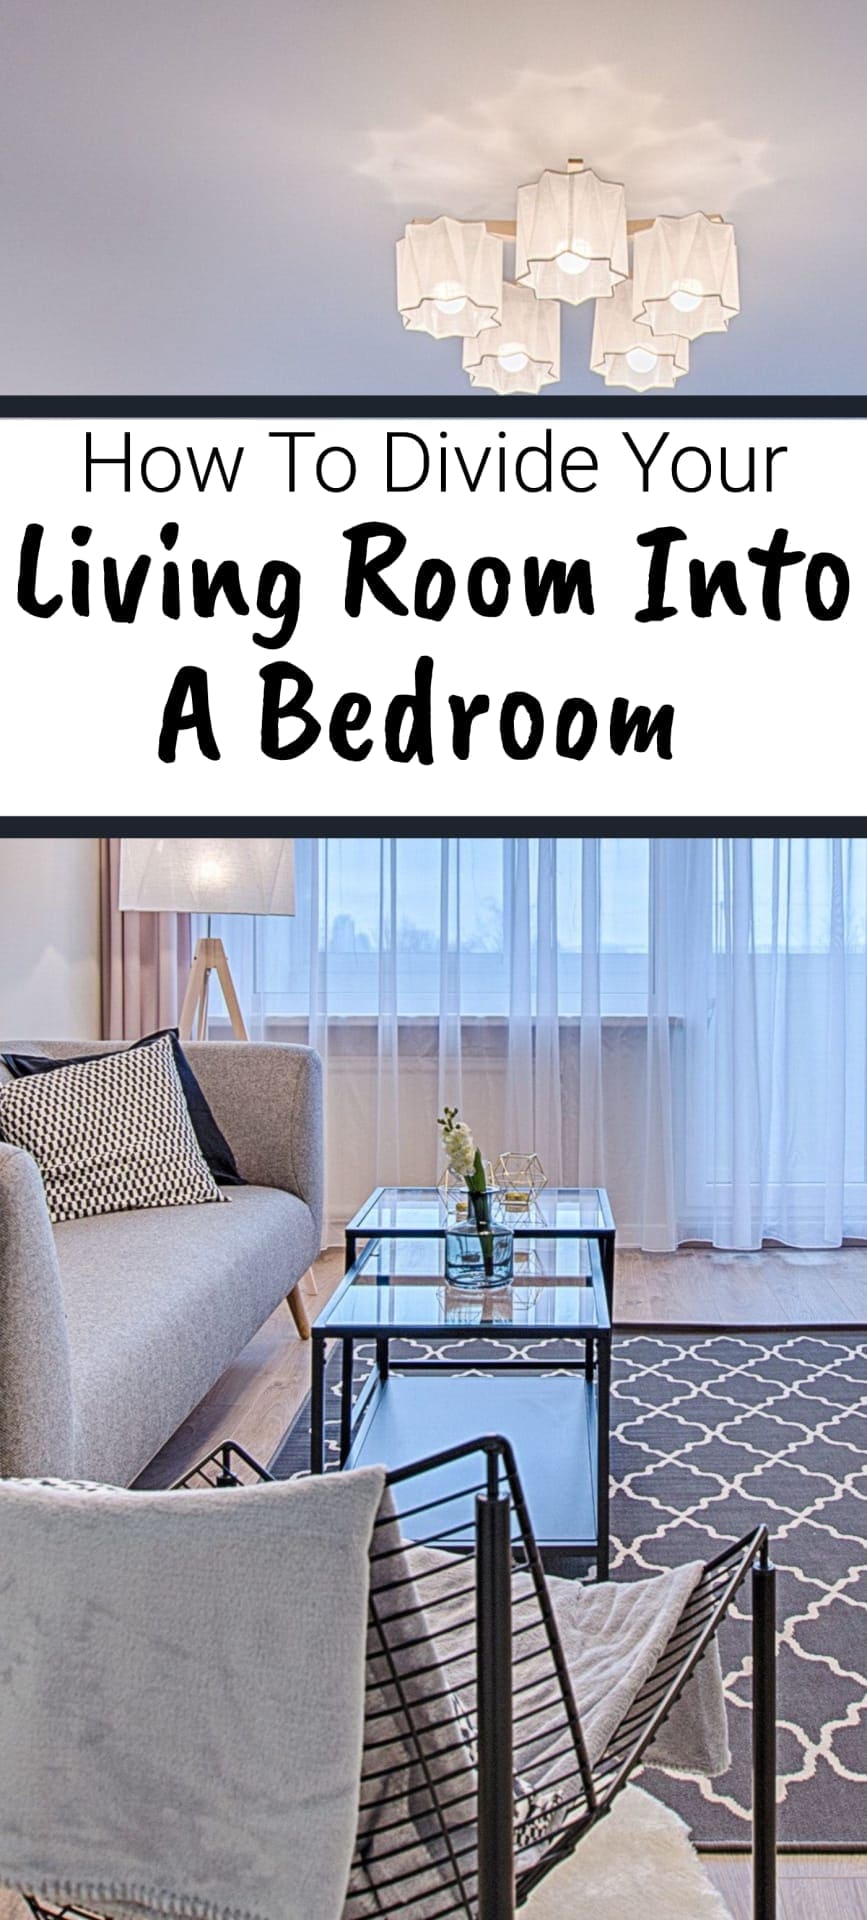 How to divide your living room into a bedroom 1 2